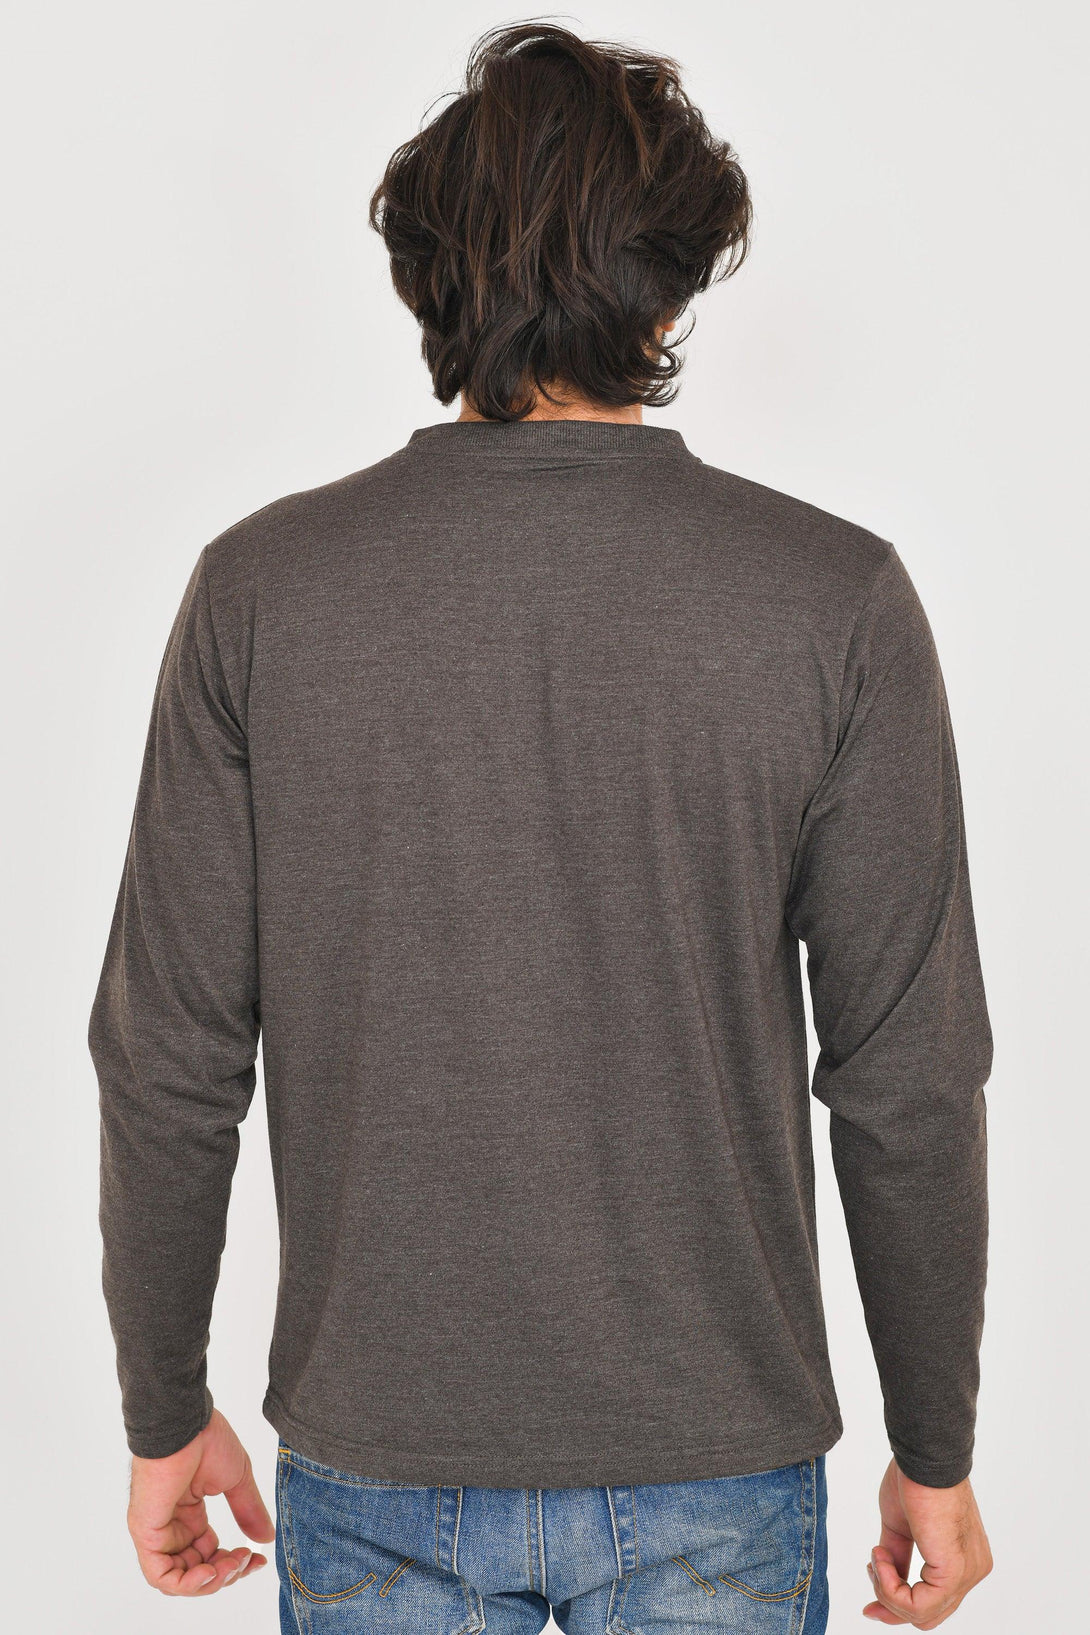 V-Neck Long Sleeve T-Shirts | CHARCOAL - Pack of 4 - FTS